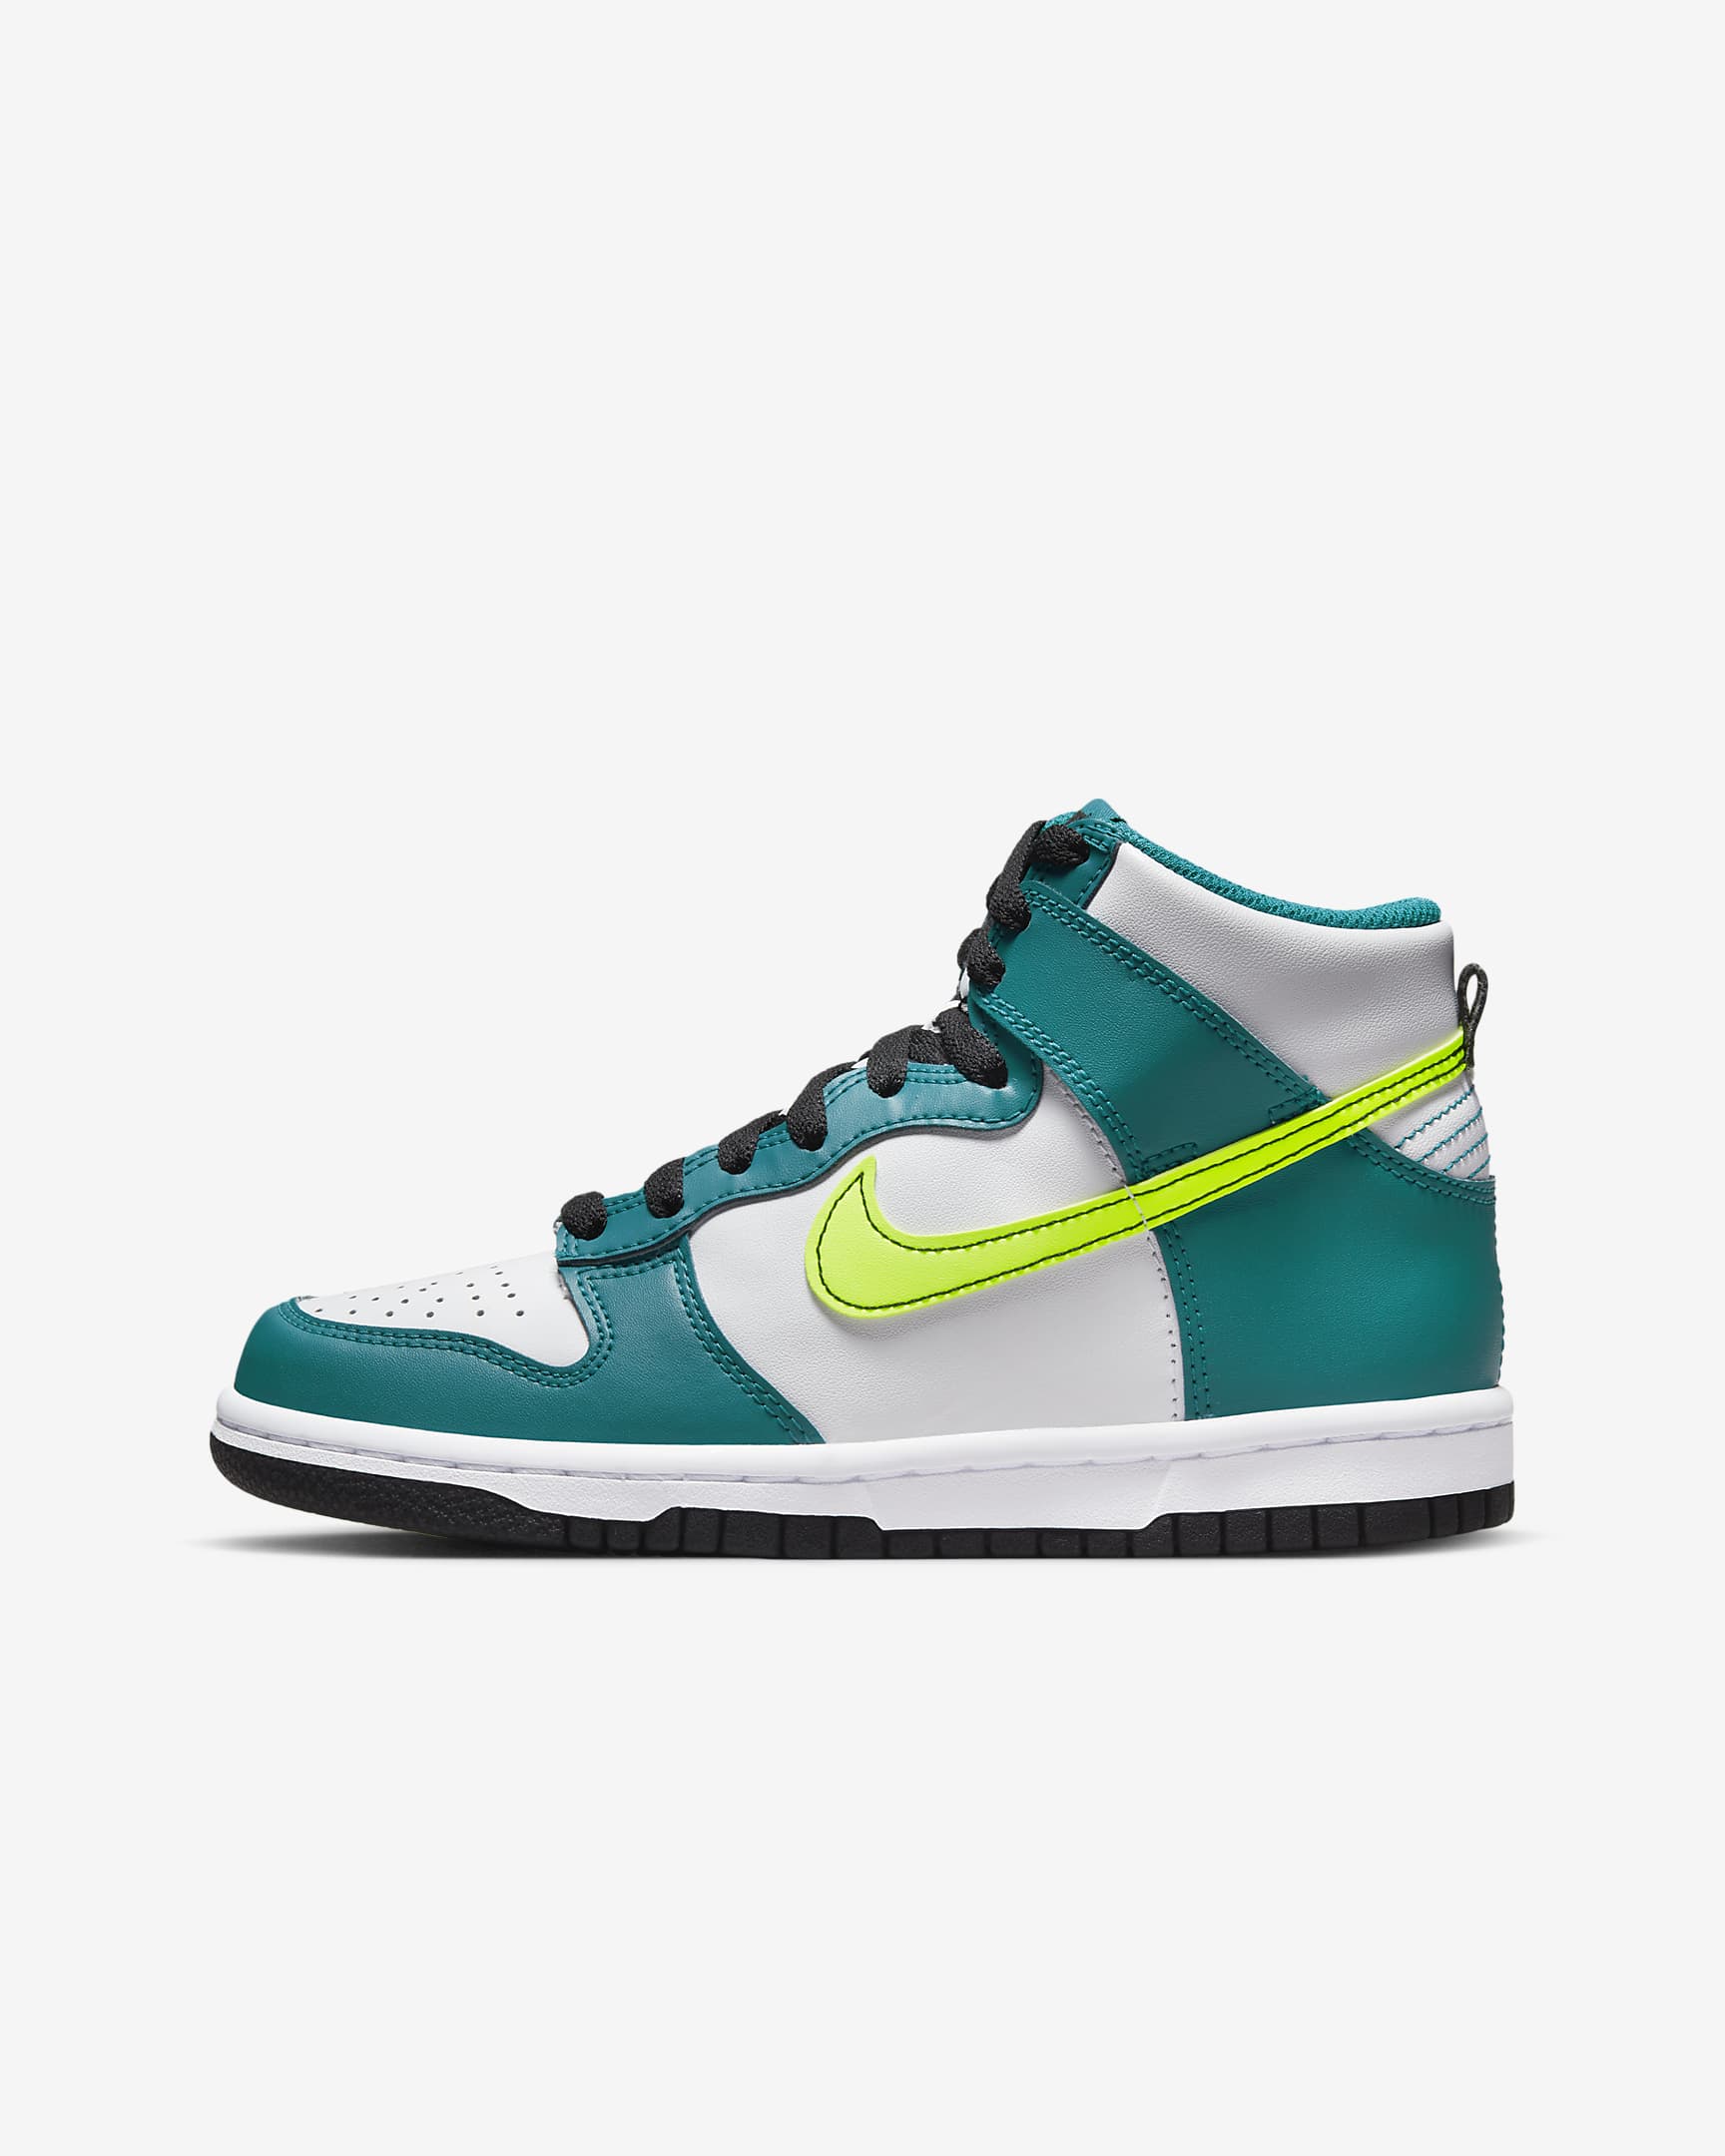 Nike Kids' Dunk High Shoes (Birght Spruce/White/Volt) $79 & More + Free Shipping